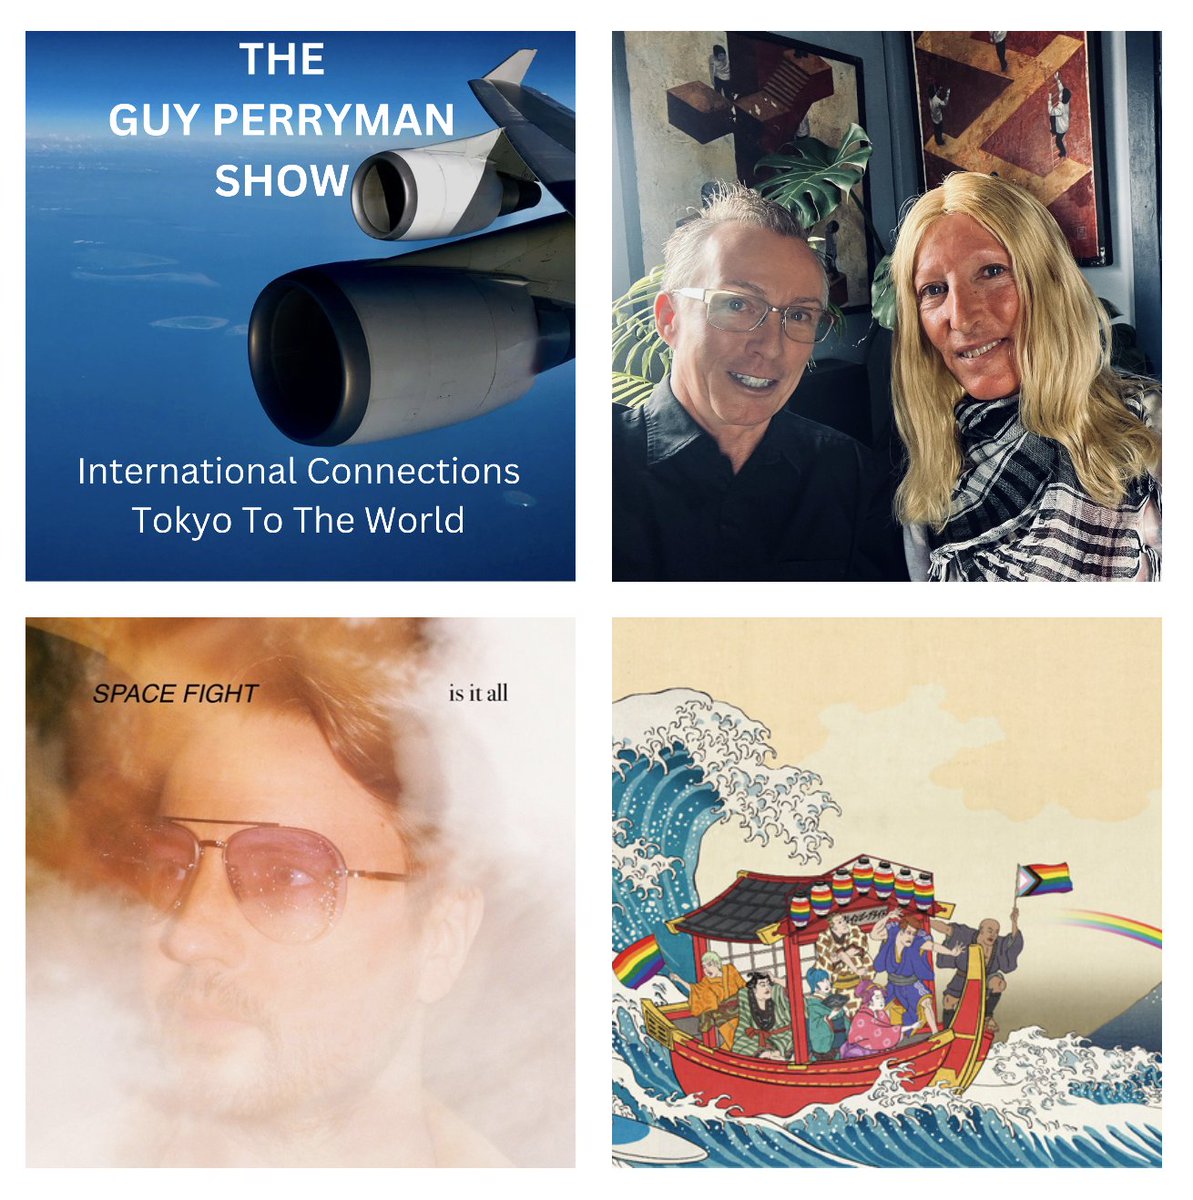 Find your colours with Aaydium from The Ring Party, exclusive message from Space Fight, set sail for @Tokyo_R_Pride and more all with the music to match!! #guyperryman GPS @InterFM897 Fri 4/19 On air live 7-10:35 interfm.co.jp On demand anytime mixcloud.com/GuyPerryman/